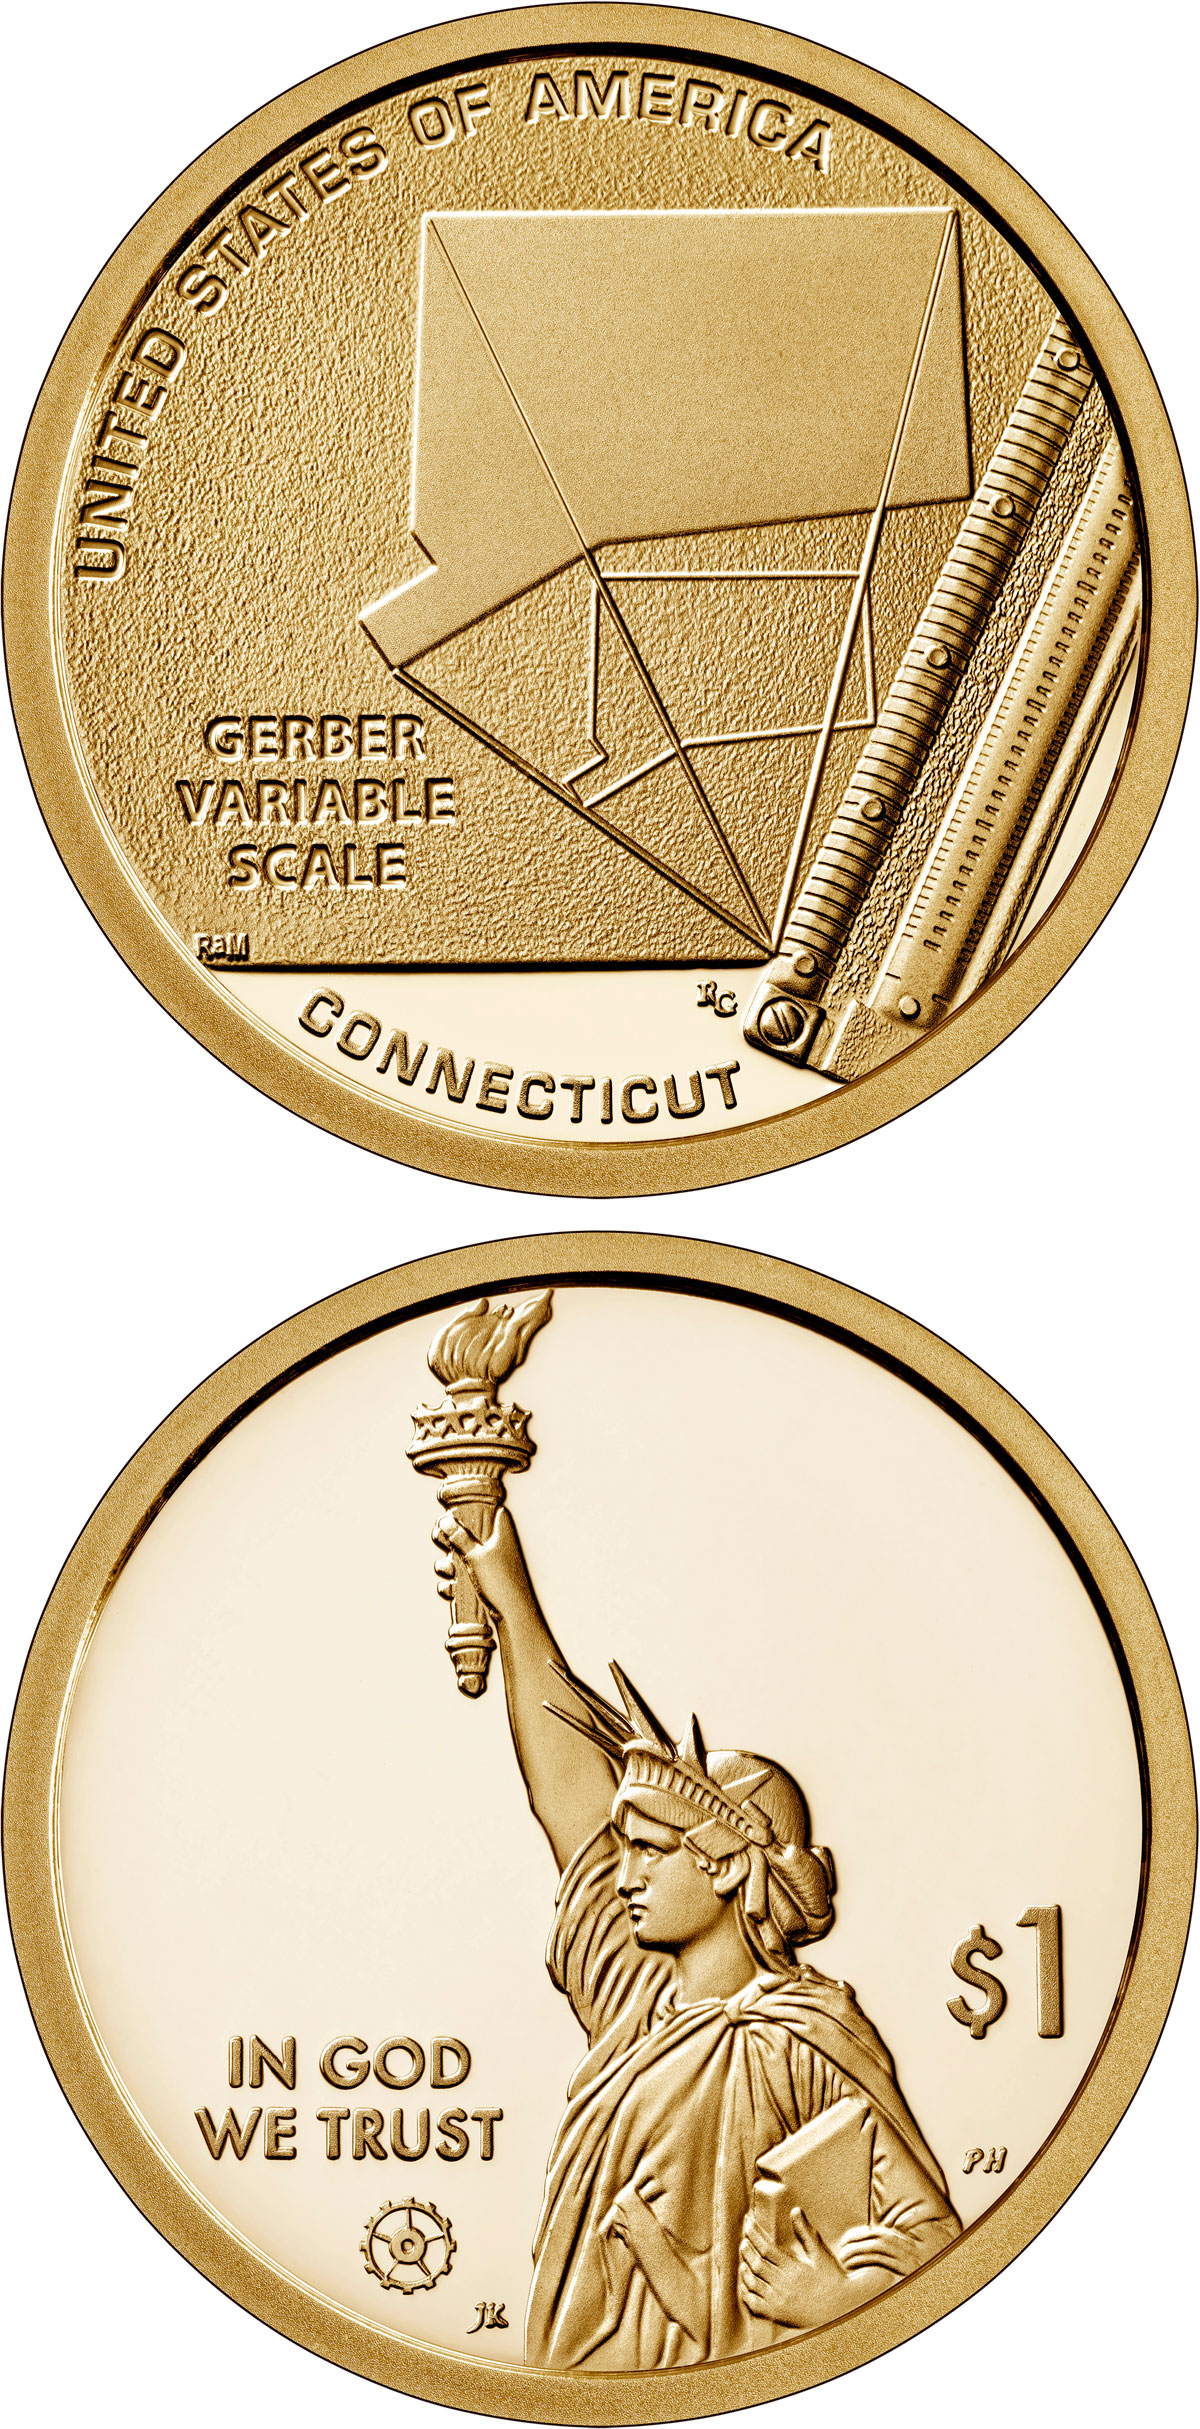 Image of 1 dollar coin - Connecticut - Gerber Variable Scale | USA 2020.  The Nordic gold (CuZnAl) coin is of Proof, BU, UNC quality.